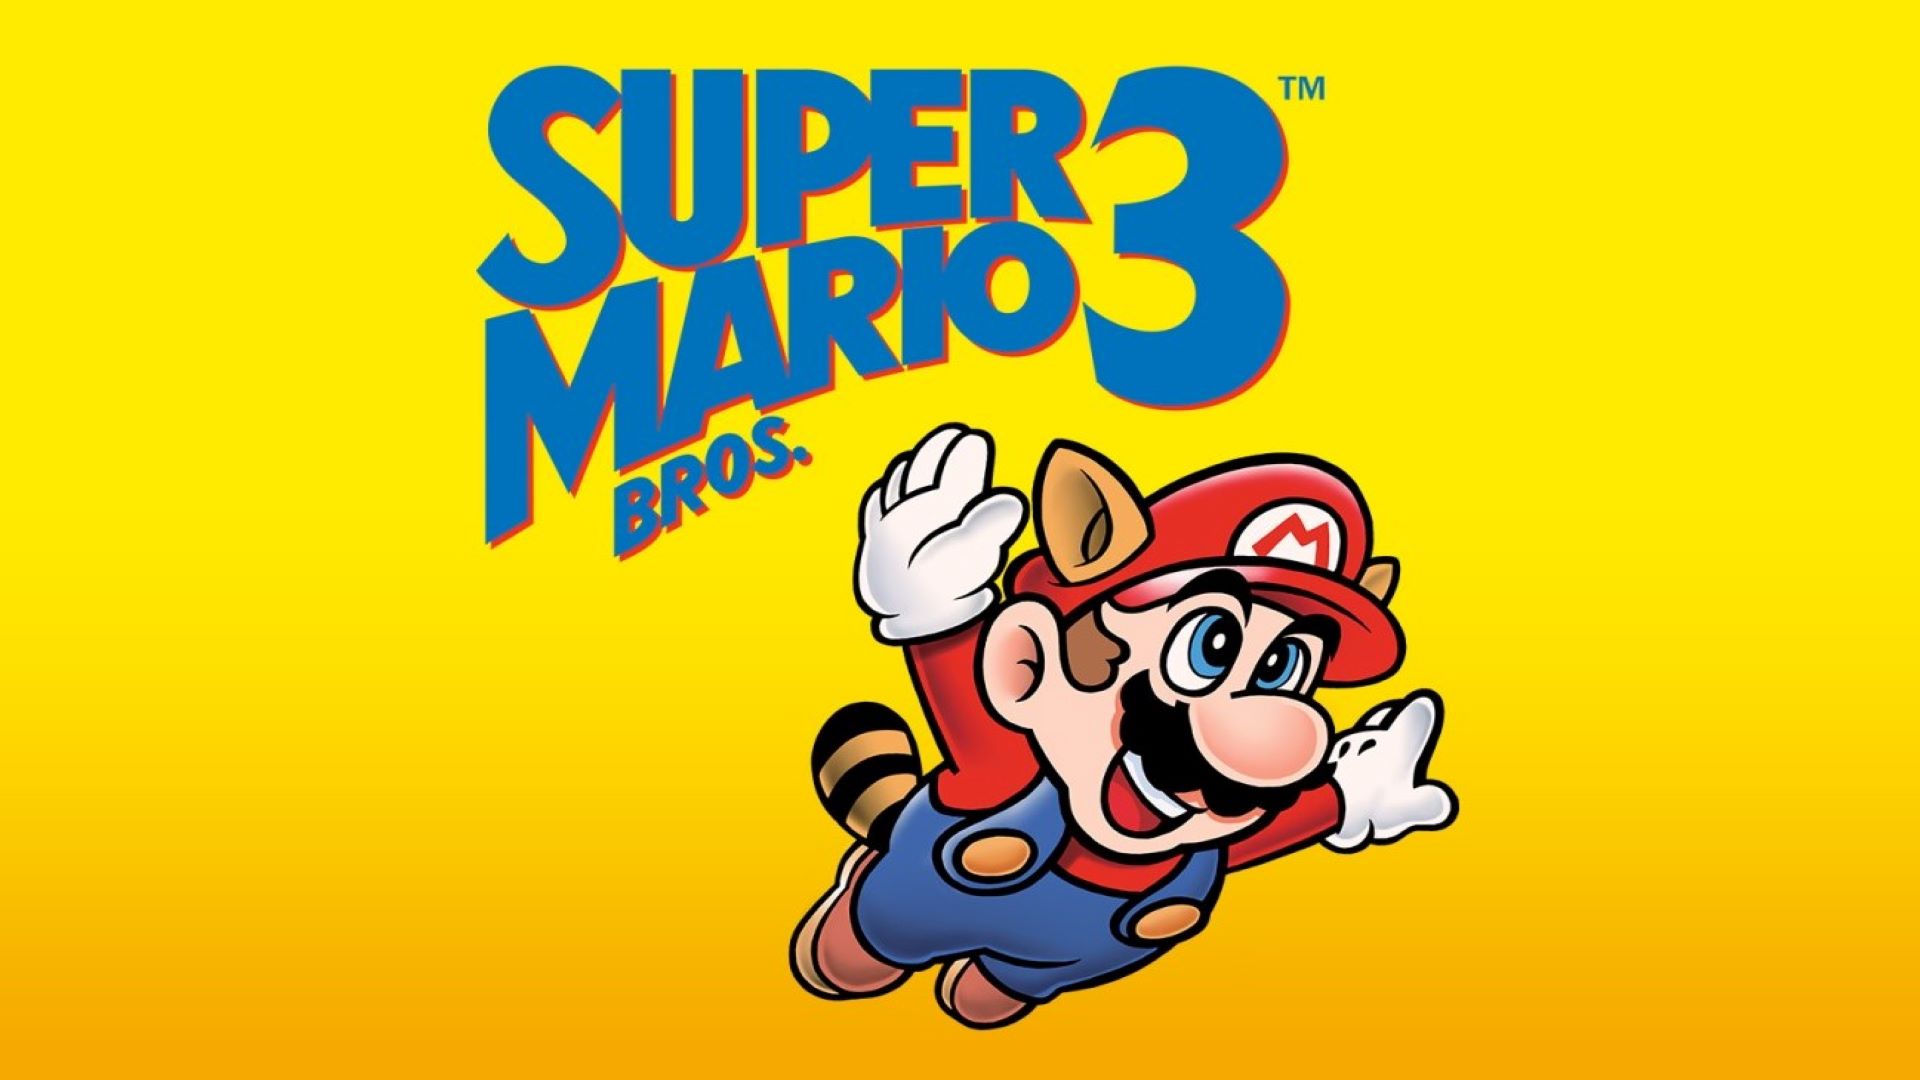 Nintendo teases Super Mario Bros. 3 as part of Switch Online